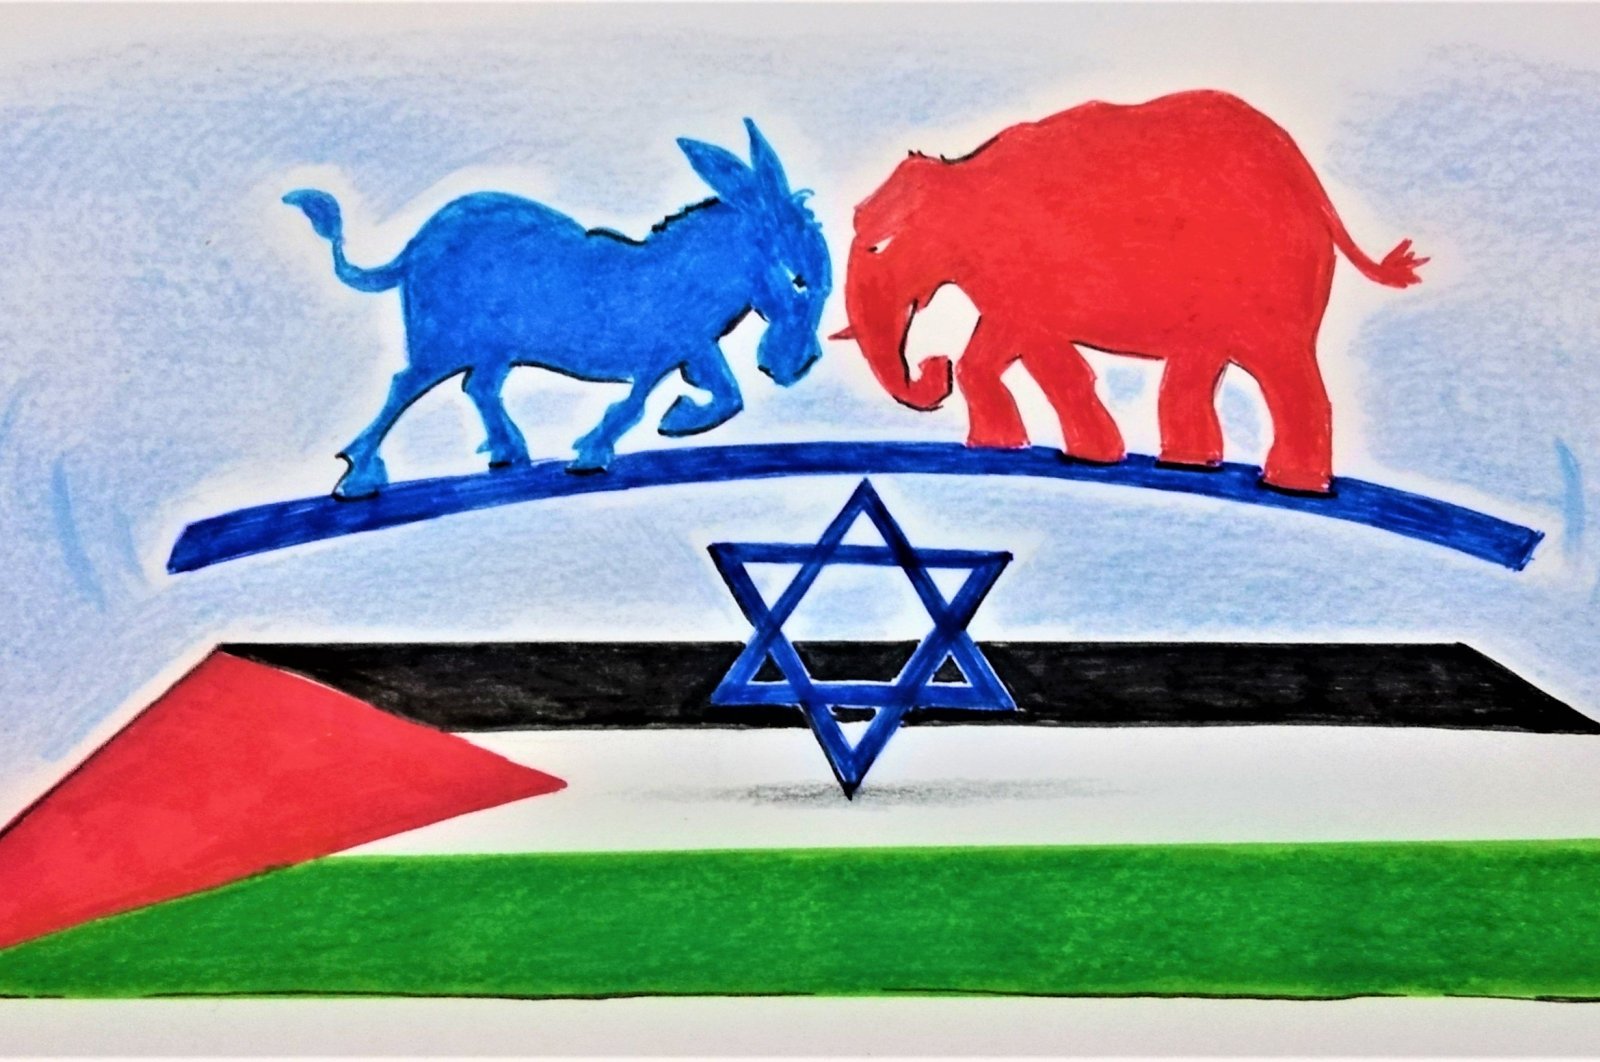 Judging by the pace of U.S. President Joe Biden’s “America is back” mantra, the Biden administration’s failure to devise a balanced approach to Palestinian-Israeli peace threatens its claim as “a defender of rights.” (Erhan Yalvaç Illustration)